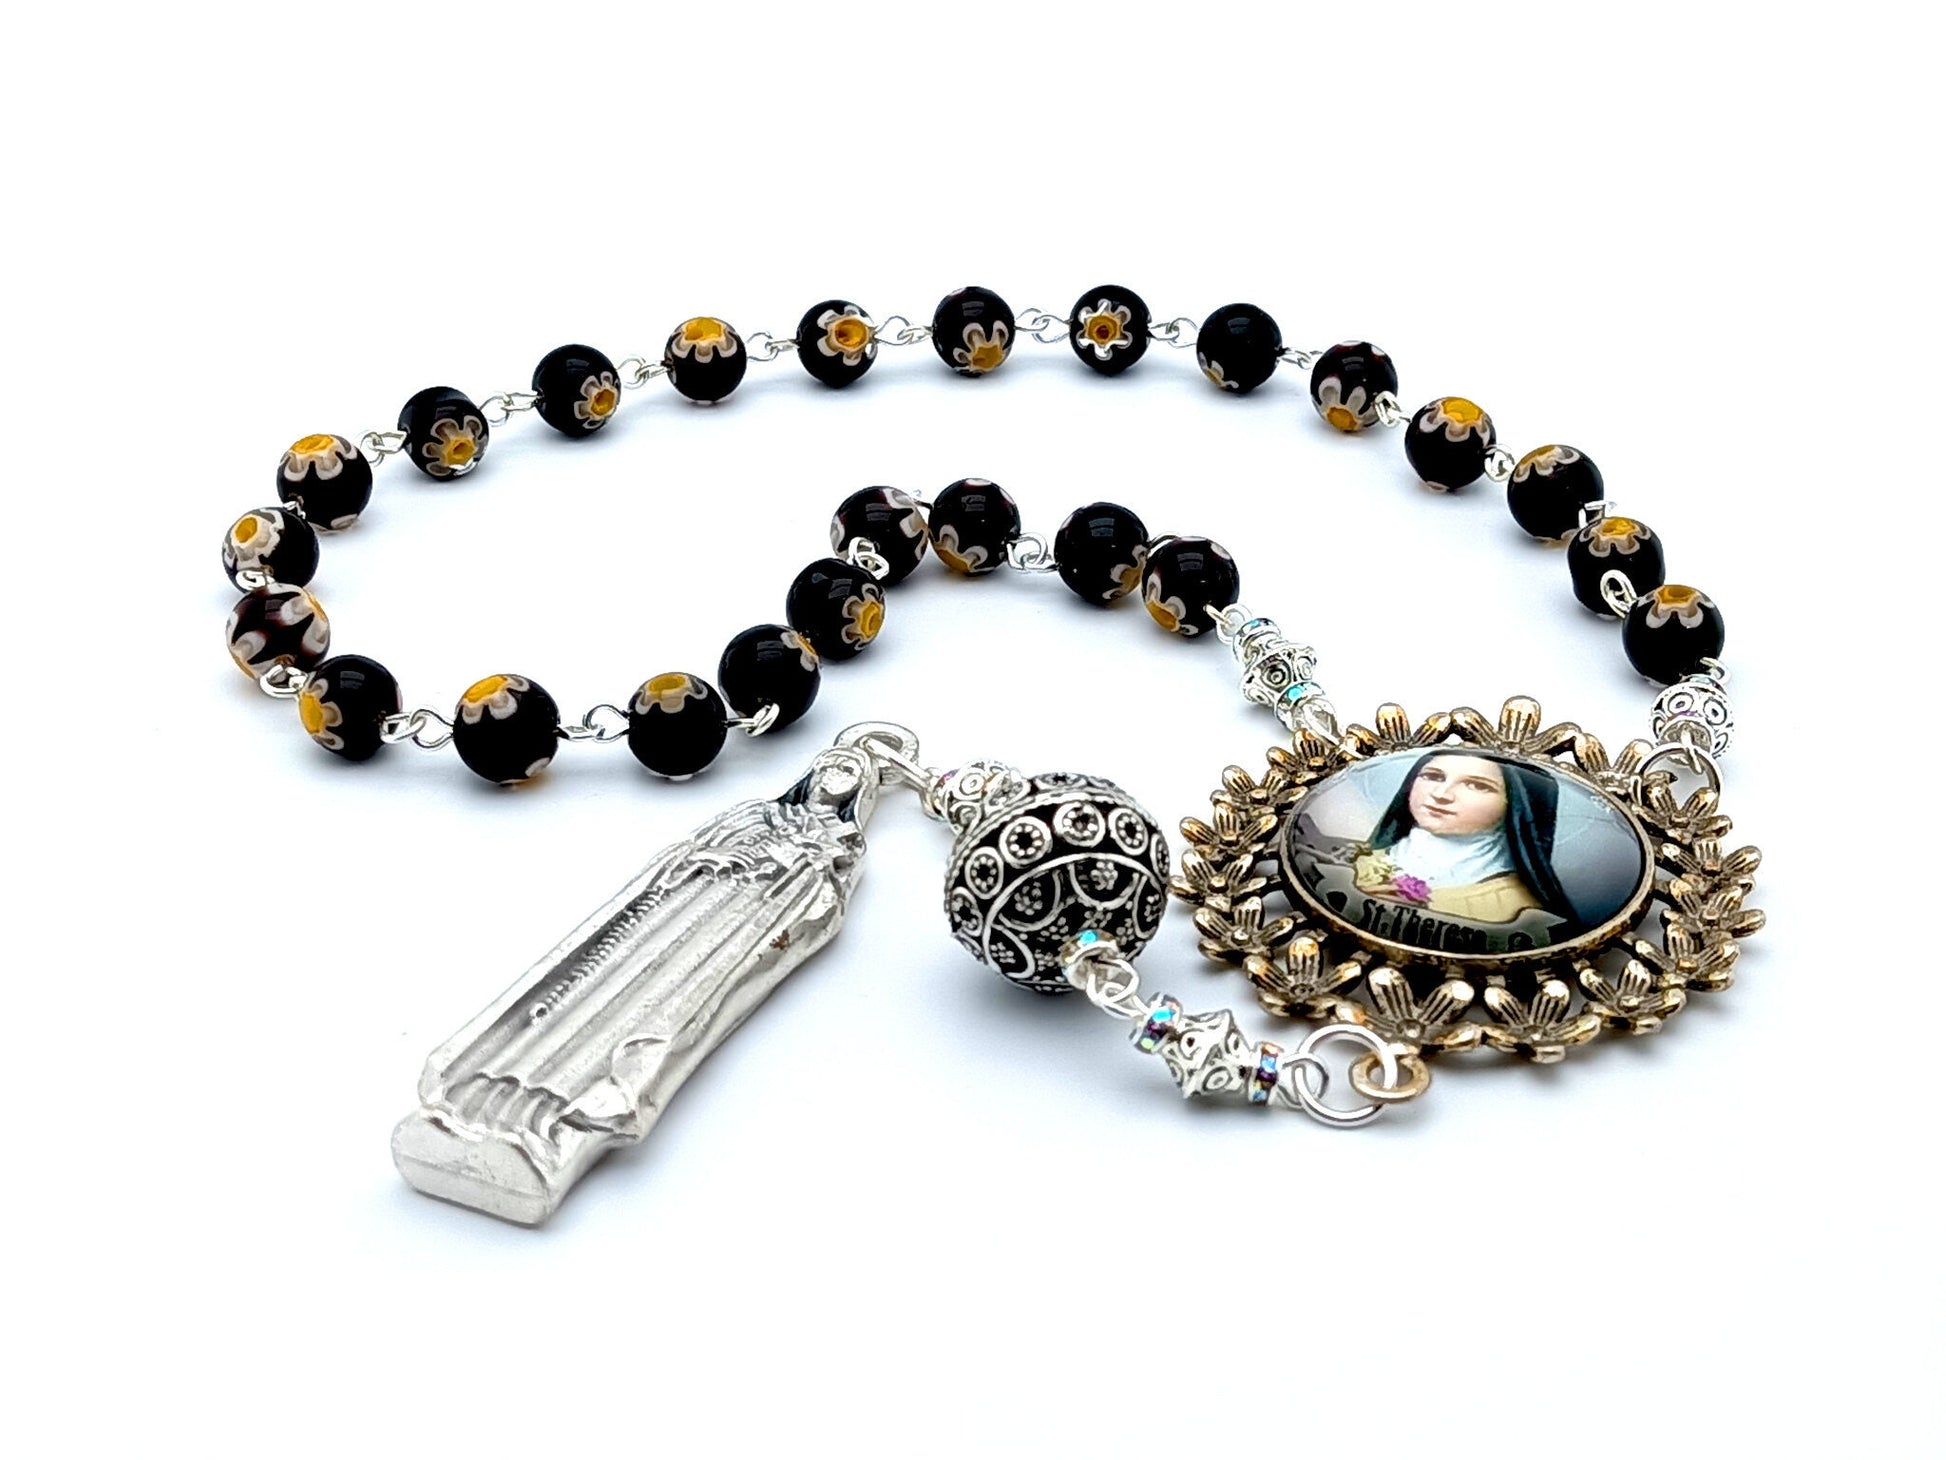 Saint Therese of Lisieux unique rosary beads prayer chaplet with flower glass beads, silver stature end medal and antiqued picture centre medal.